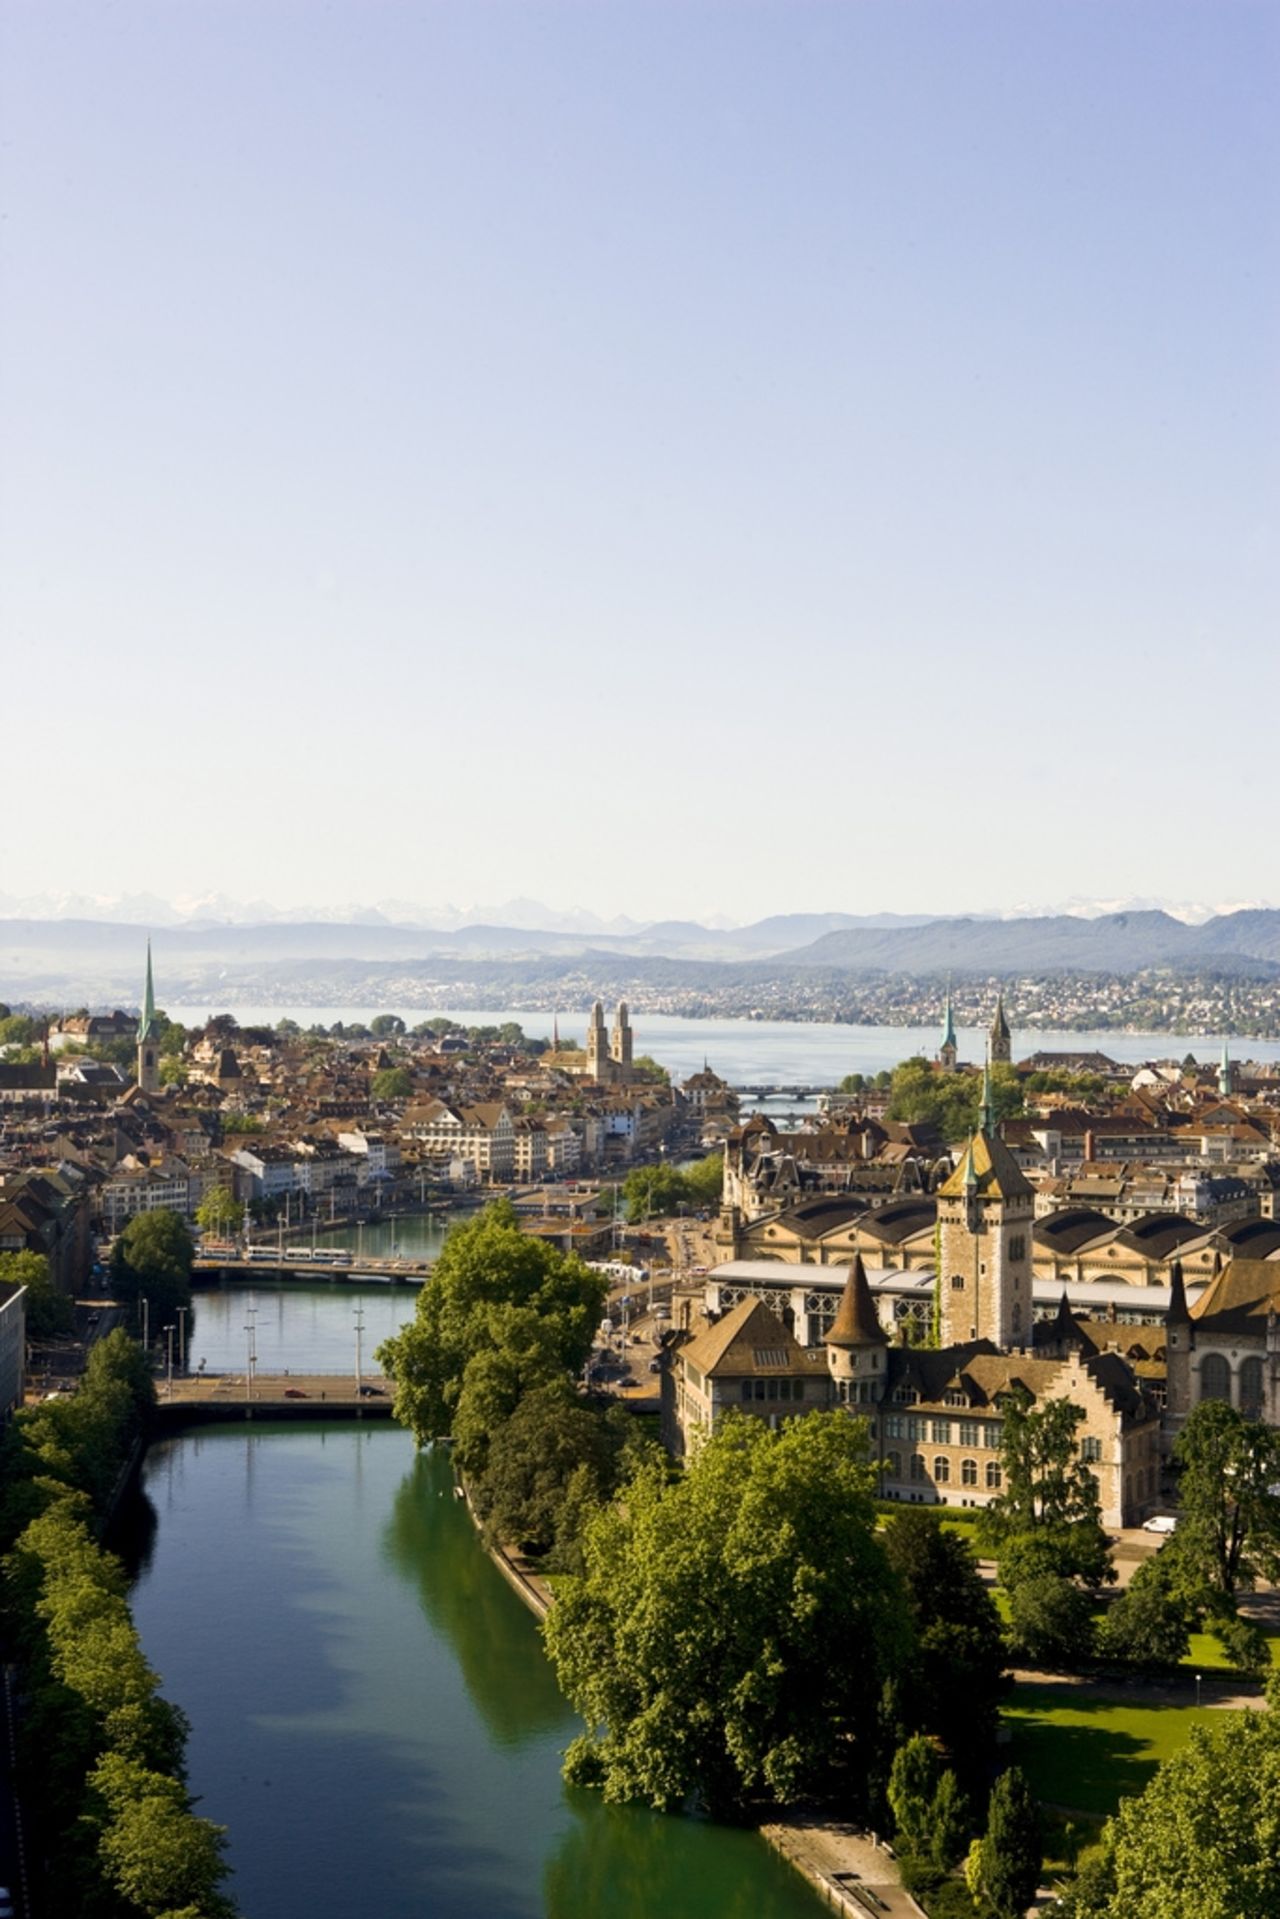 Zurich's excellent, efficient public transport means you can visit the beautiful "Old Town" even during a short stopover